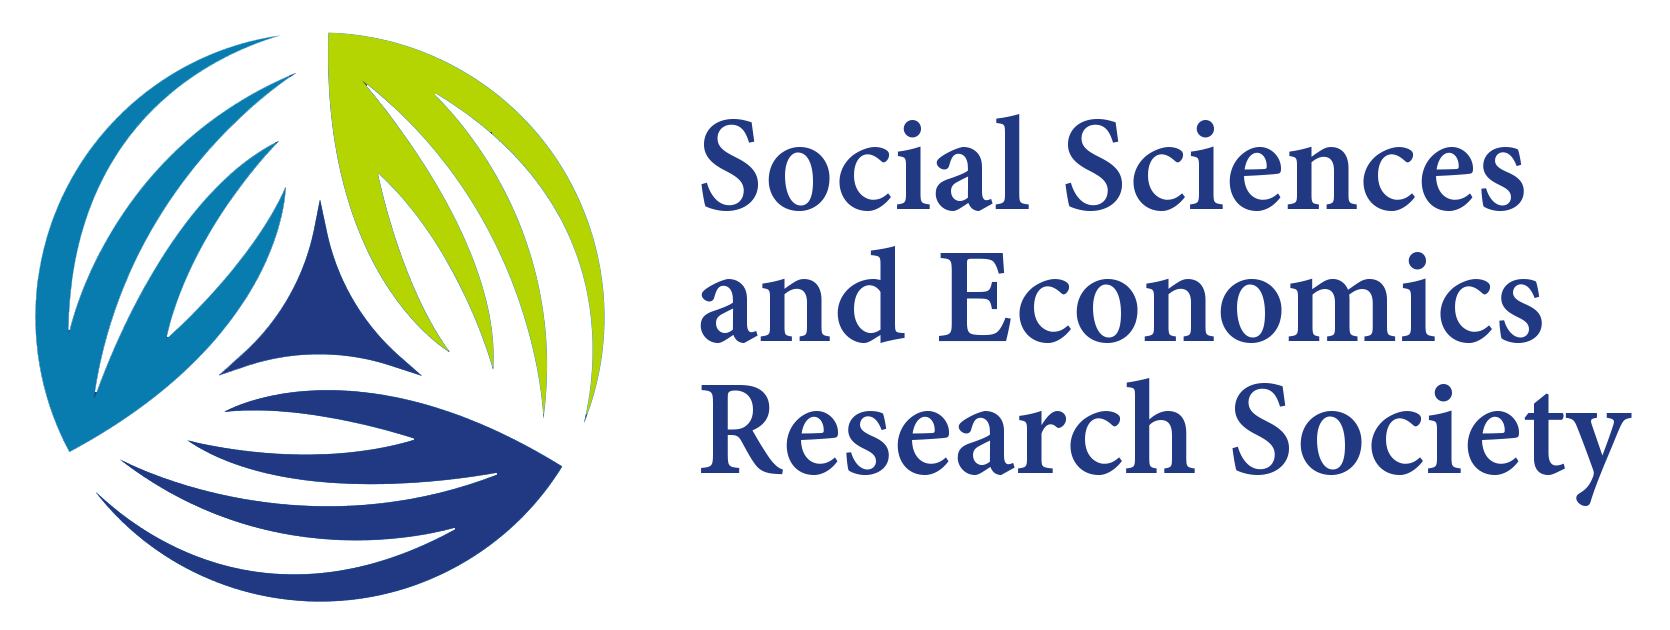 SSERS 3rd International Conference on  Culture and Heritage, Economics, Management, Social Sciences & Business Applications